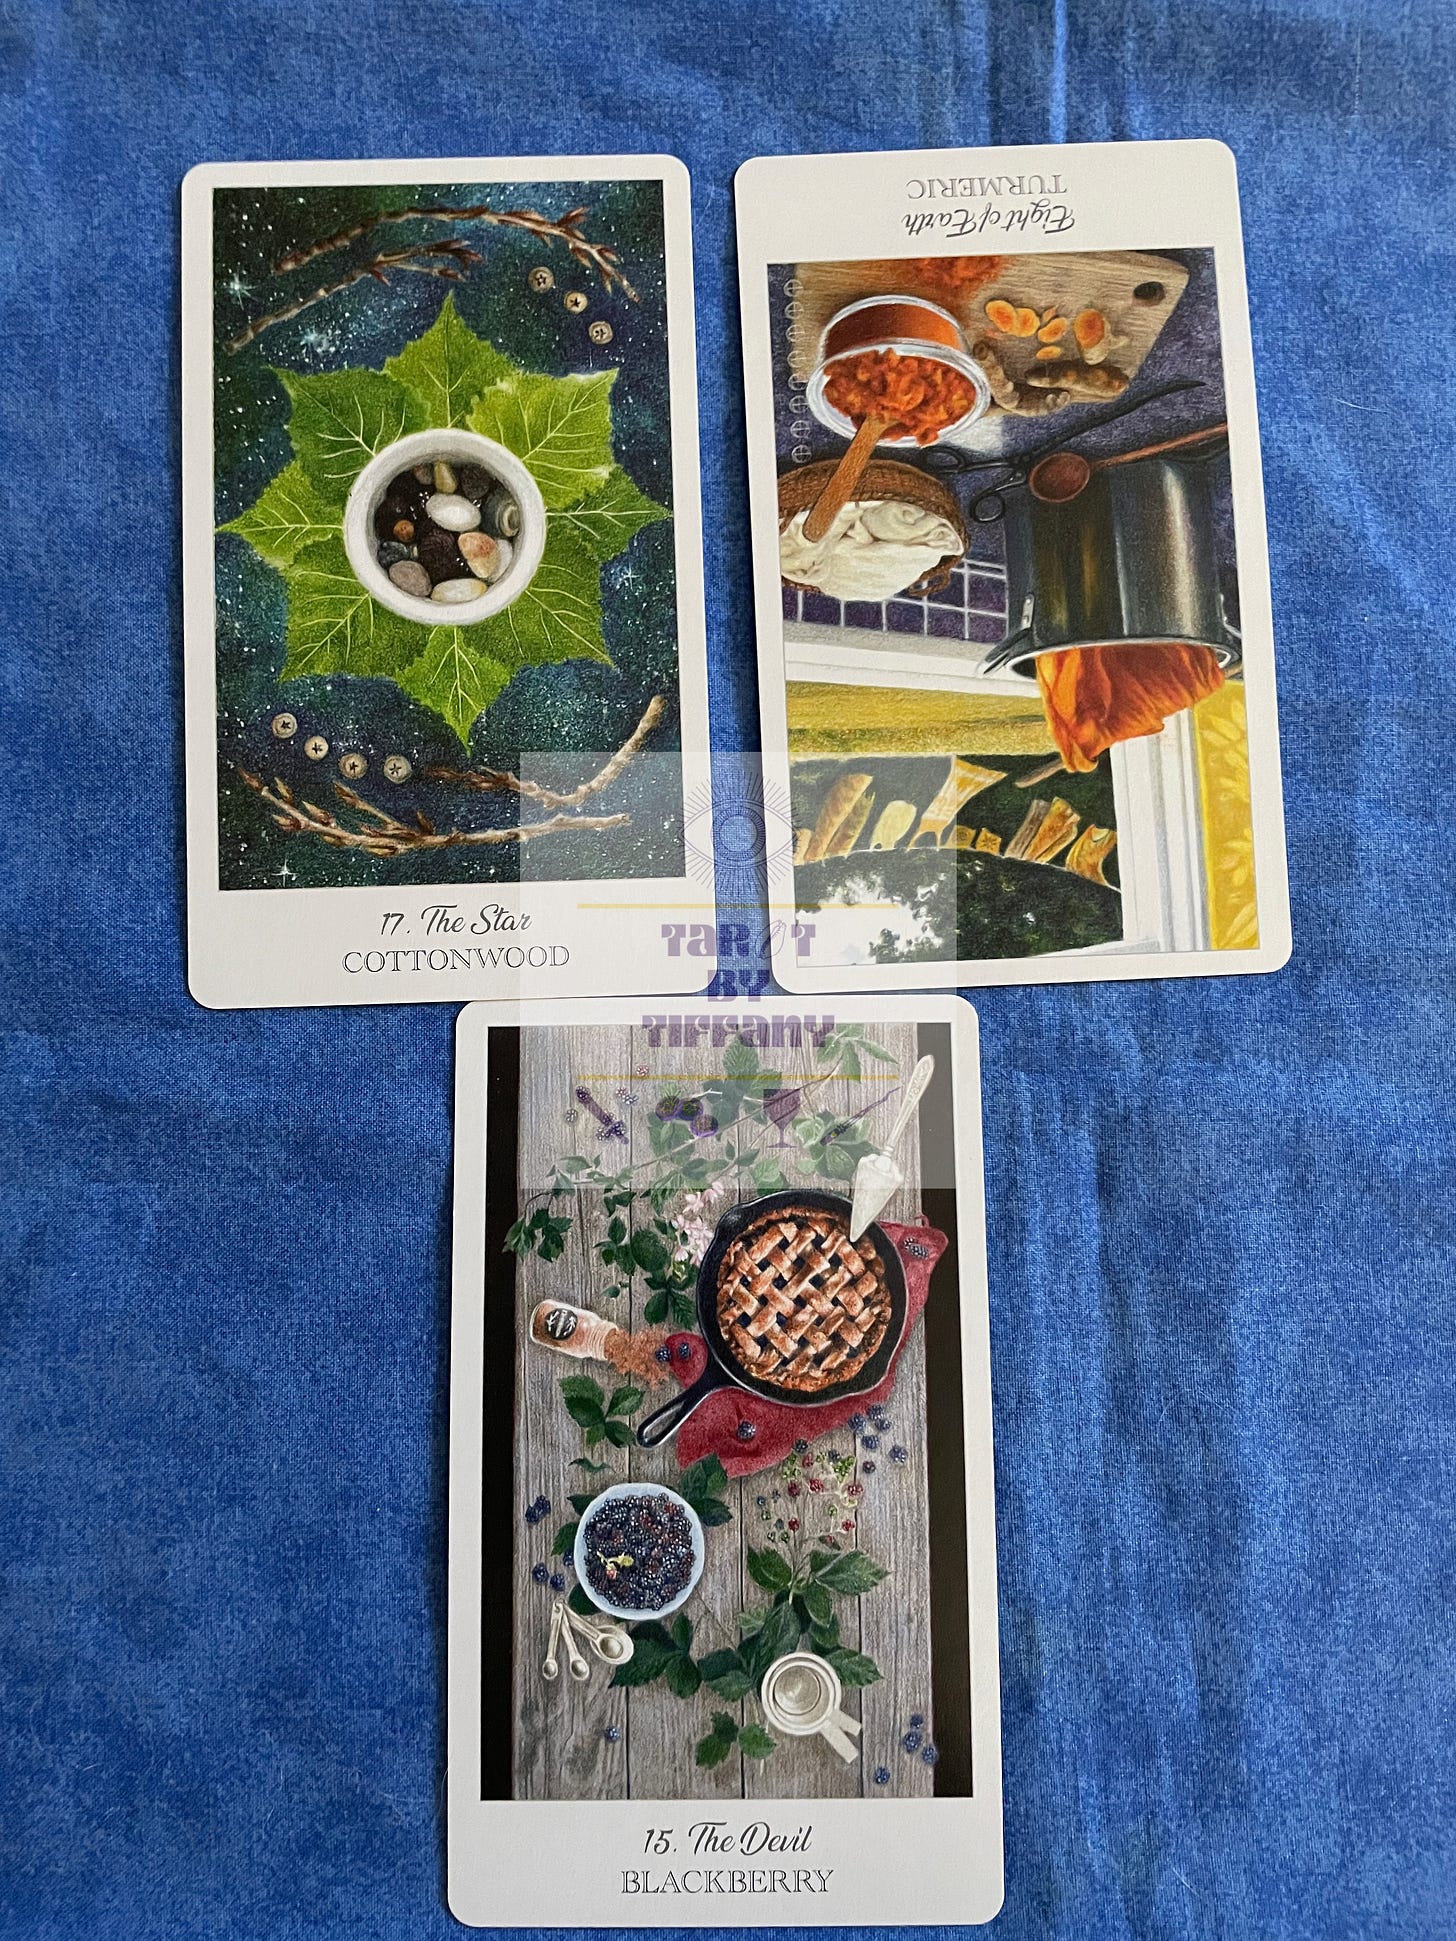 3-card reading with the Herbcrafter’s Tarot. The cards are laid on a cobalt blue cloth background. Top two cards (L-R): The Star (Cottonwood), Eight of Earth (Tumeric) reversed. Bottom card: The Devil (Blackberry).